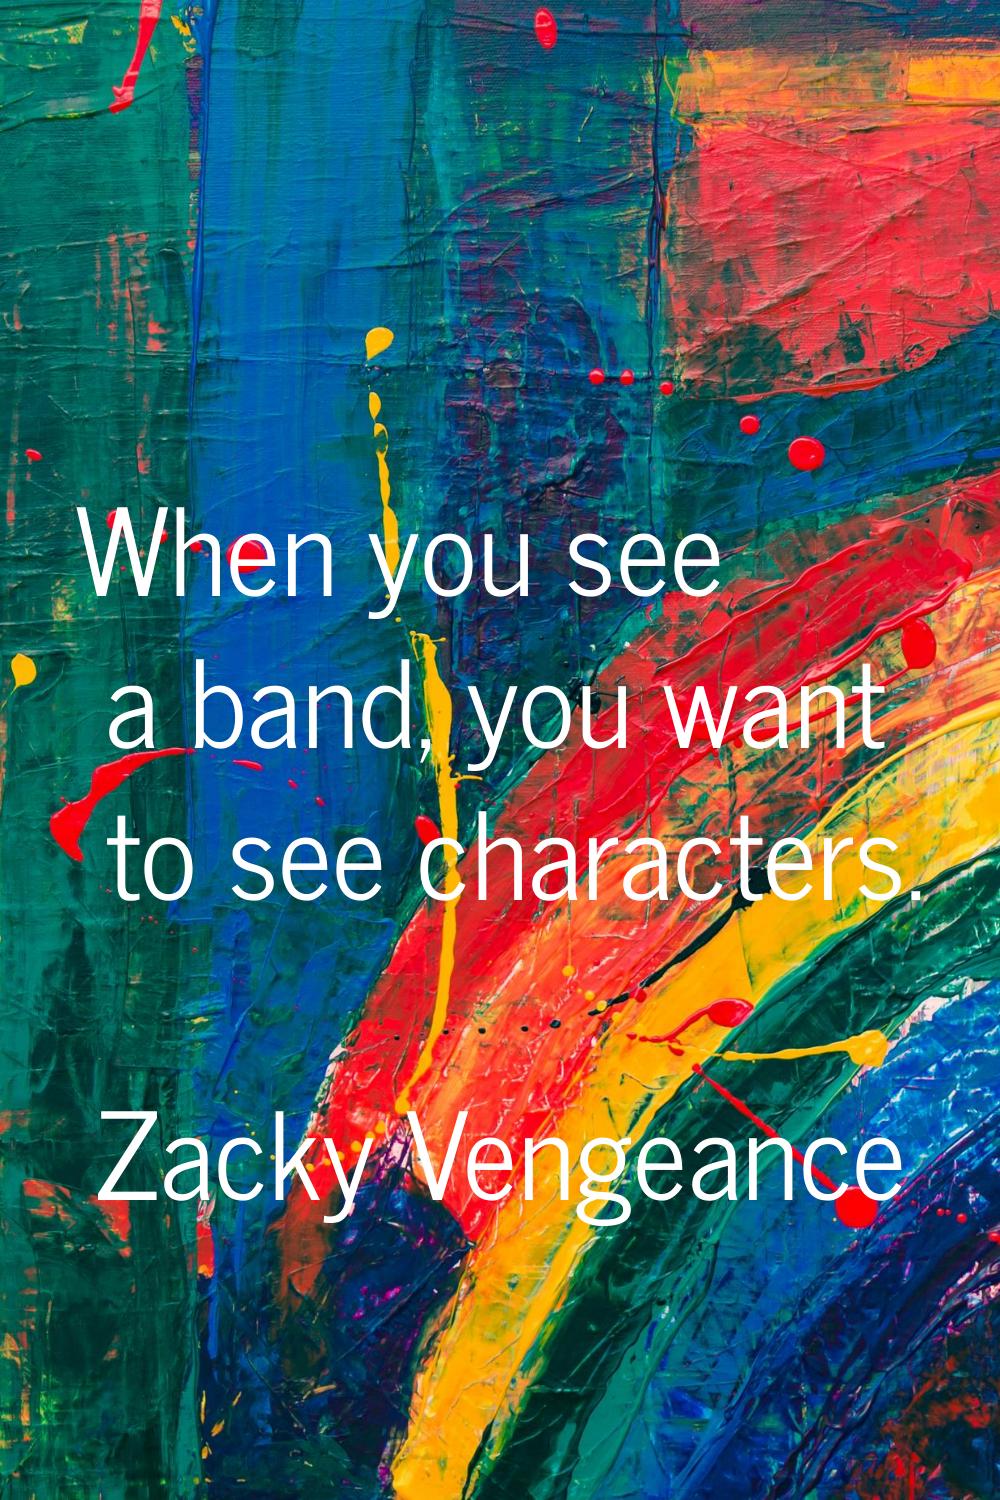 When you see a band, you want to see characters.